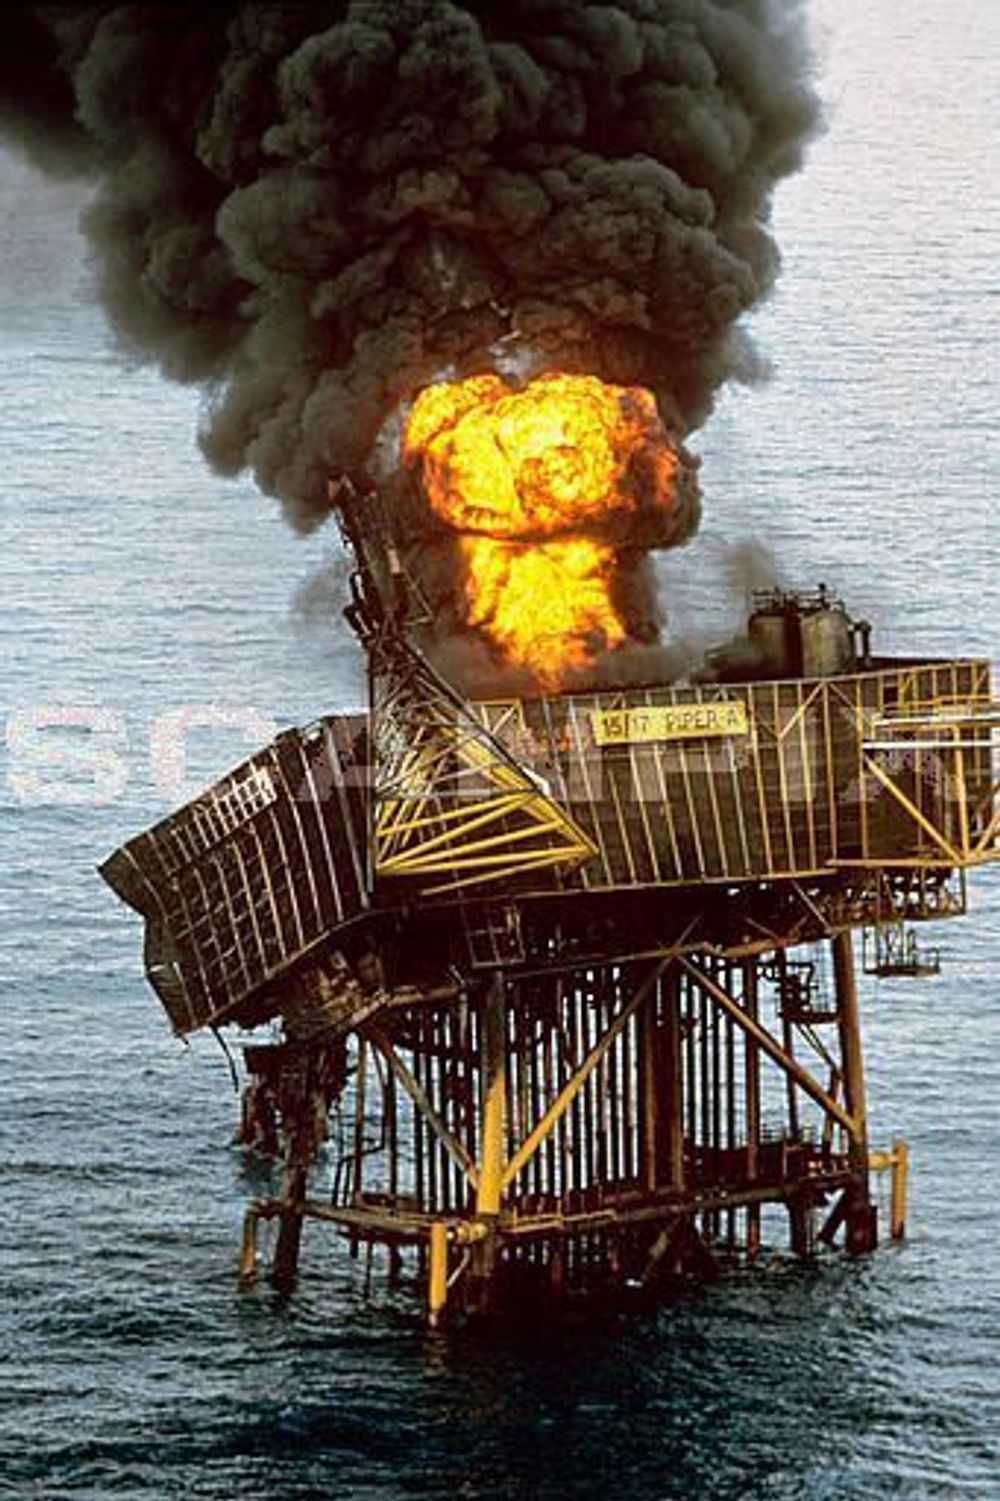 sx6d7be4
Overskrift 	Piper Alpha anniversary
Caption 	File photo dated 08/07/1988 of the North Sea oil rig Piper Alpha after an explosion.